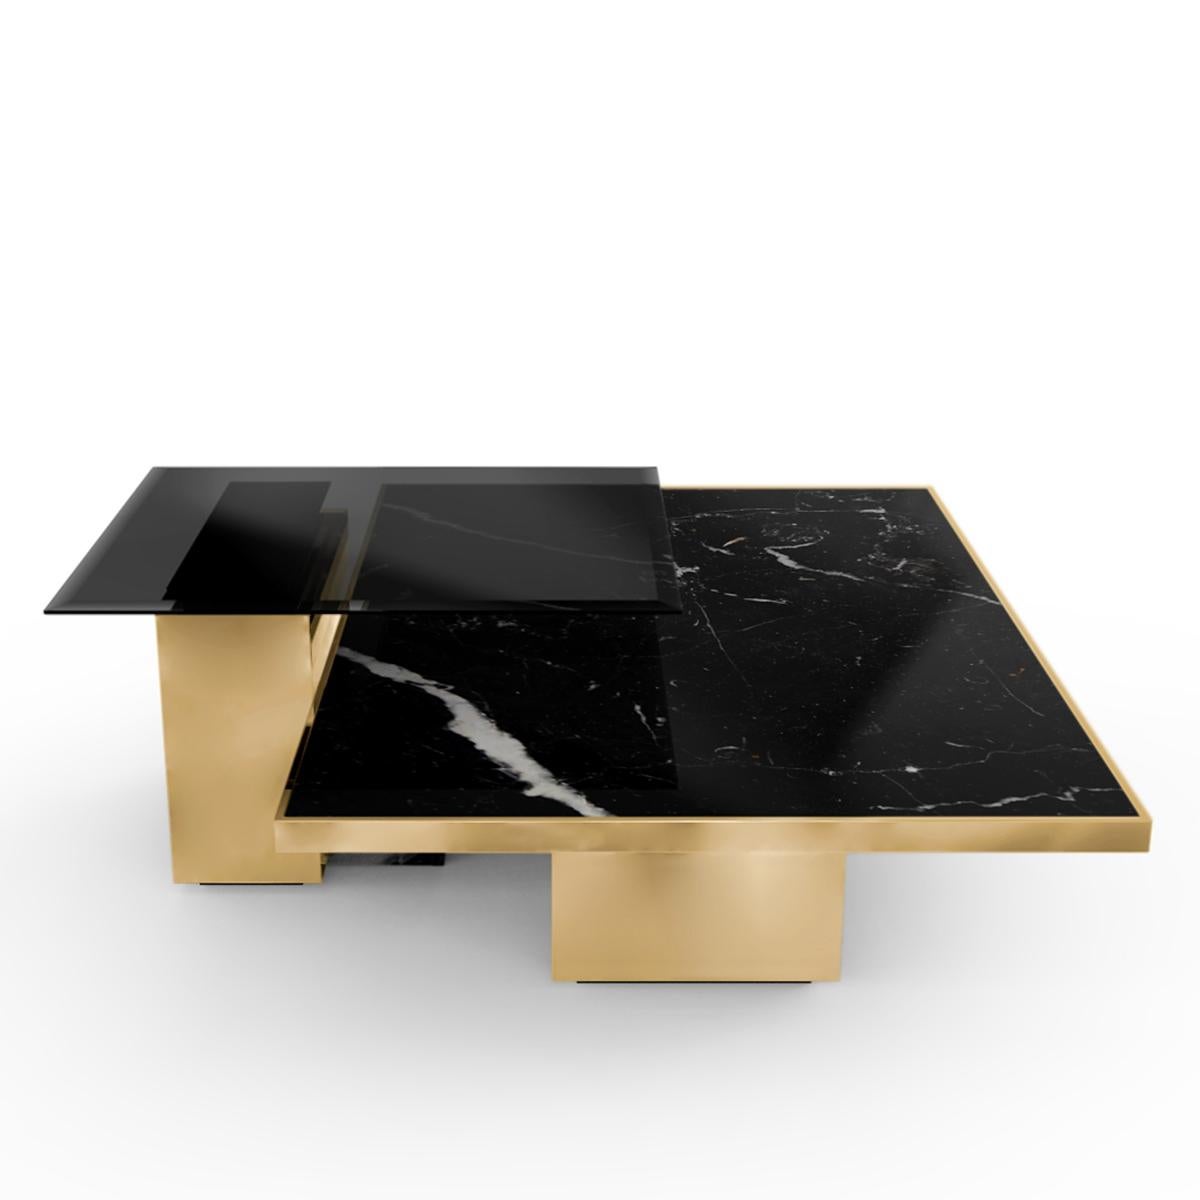 Coffee table Gaius with wood structure and polished 
brass structure. With black marble top and with smoked 
glass top. On black lacquered wooden base.